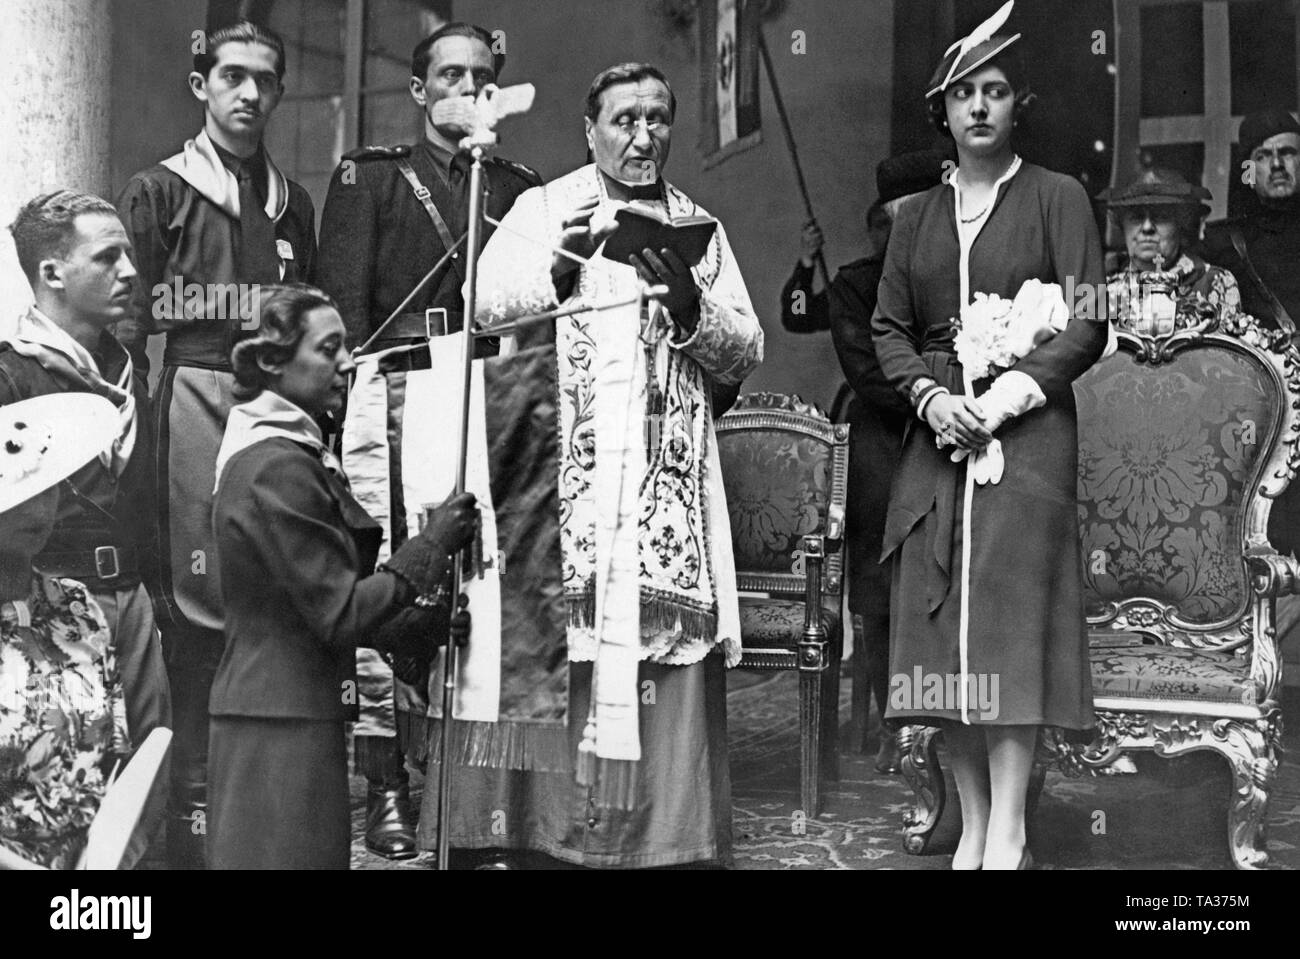 Mafalda, also Mary of Savoy, assists a priest in the blessing of a unit. The pennant 'Dante Alighieri' is handed over by a clergyman. After the conclusion of the Lateran Treaty in 1929, the relationship between the Italian state and the Vatican normalized. Stock Photo